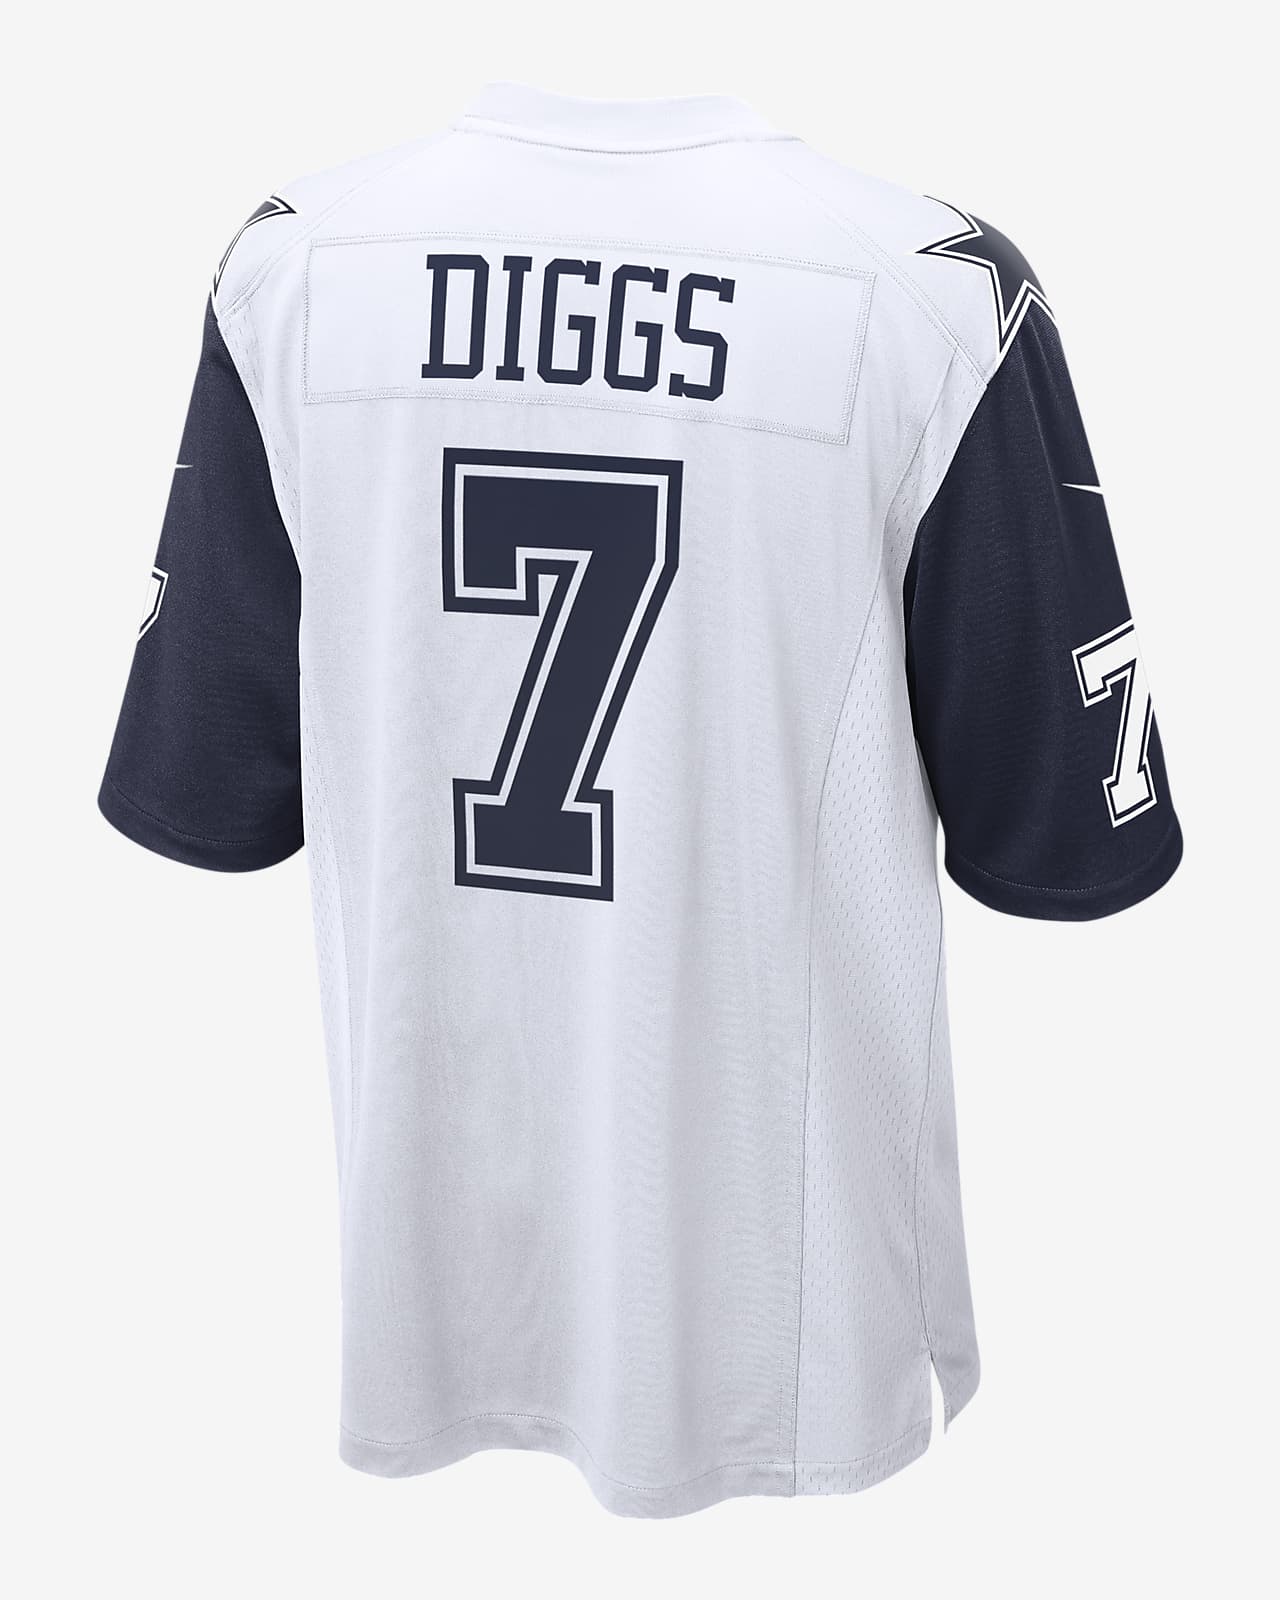 cowboys jersey numbers